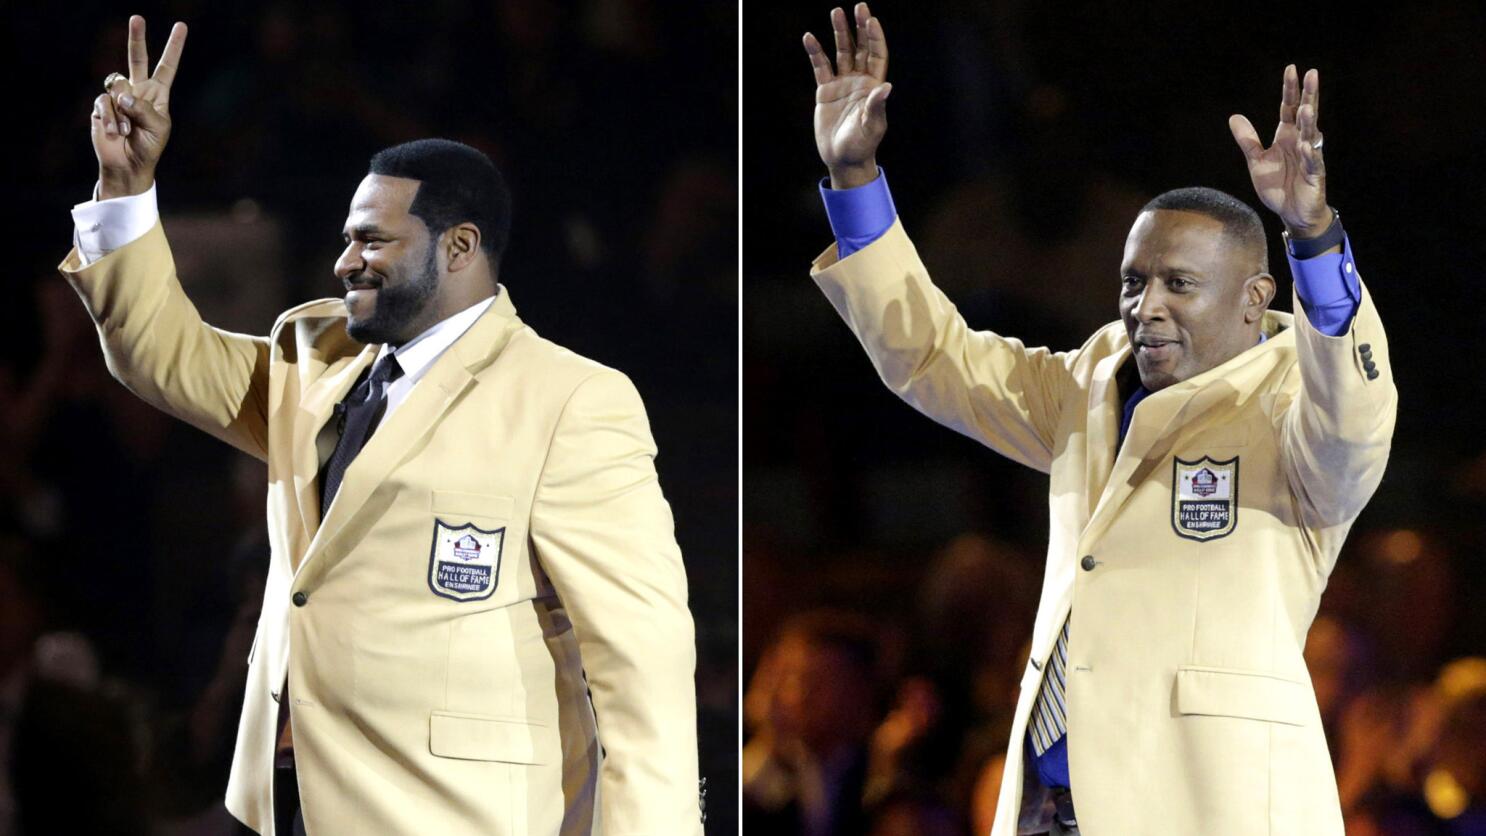 Column: Tim Brown and Jerome Bettis ride NFL fame from L.A. to